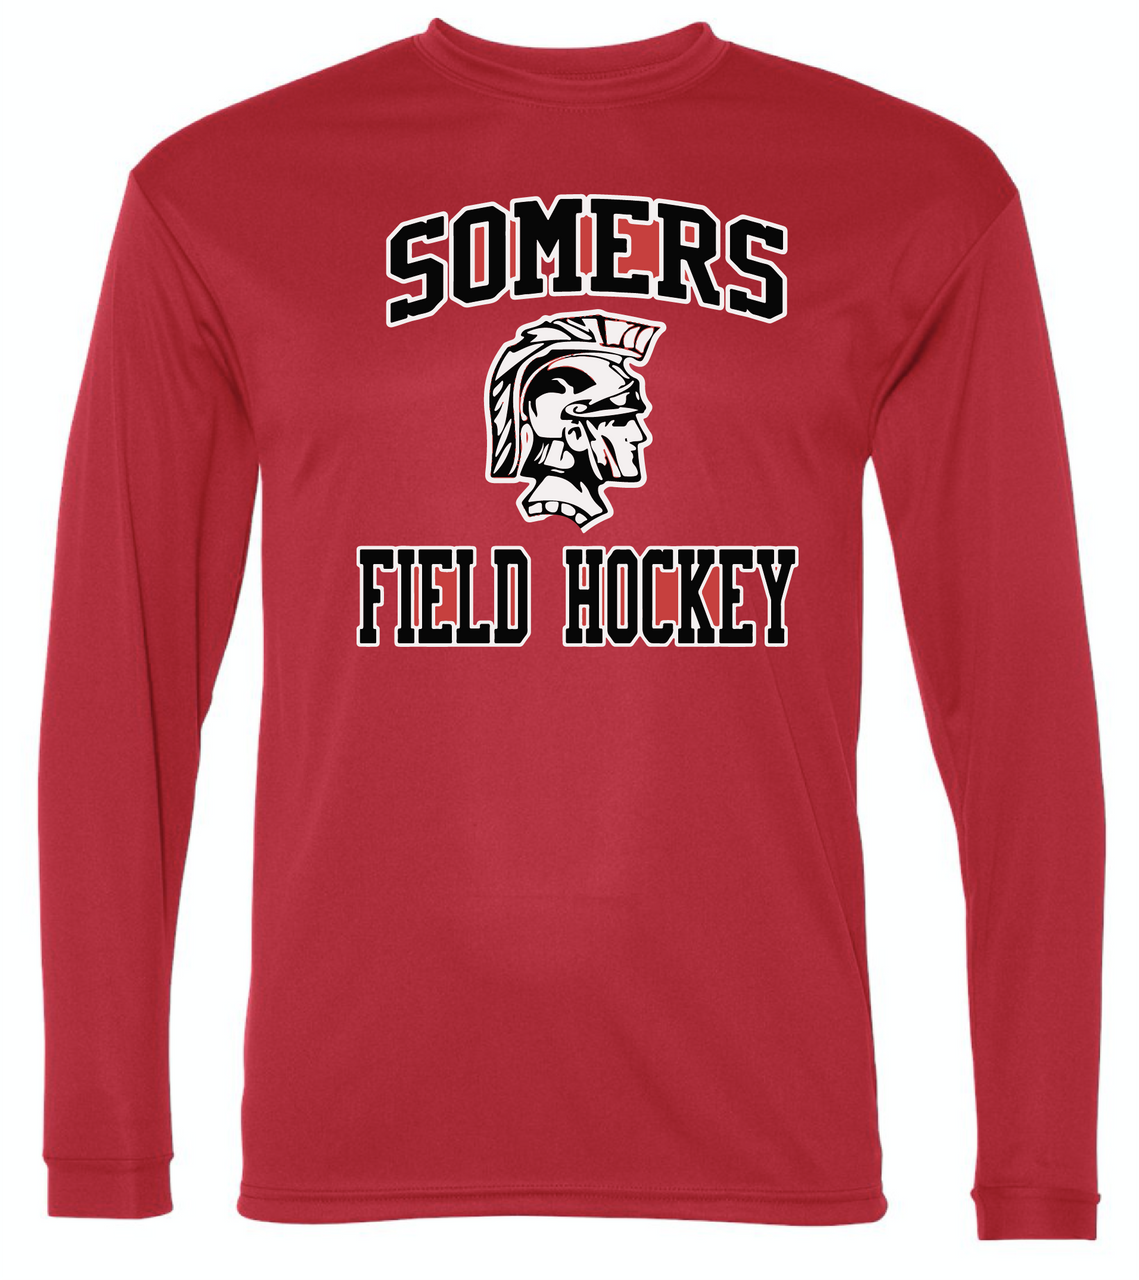 Somers Field Hockey C2 Polyester Tee Shirt Long Sleeve Red Youth and Adult 